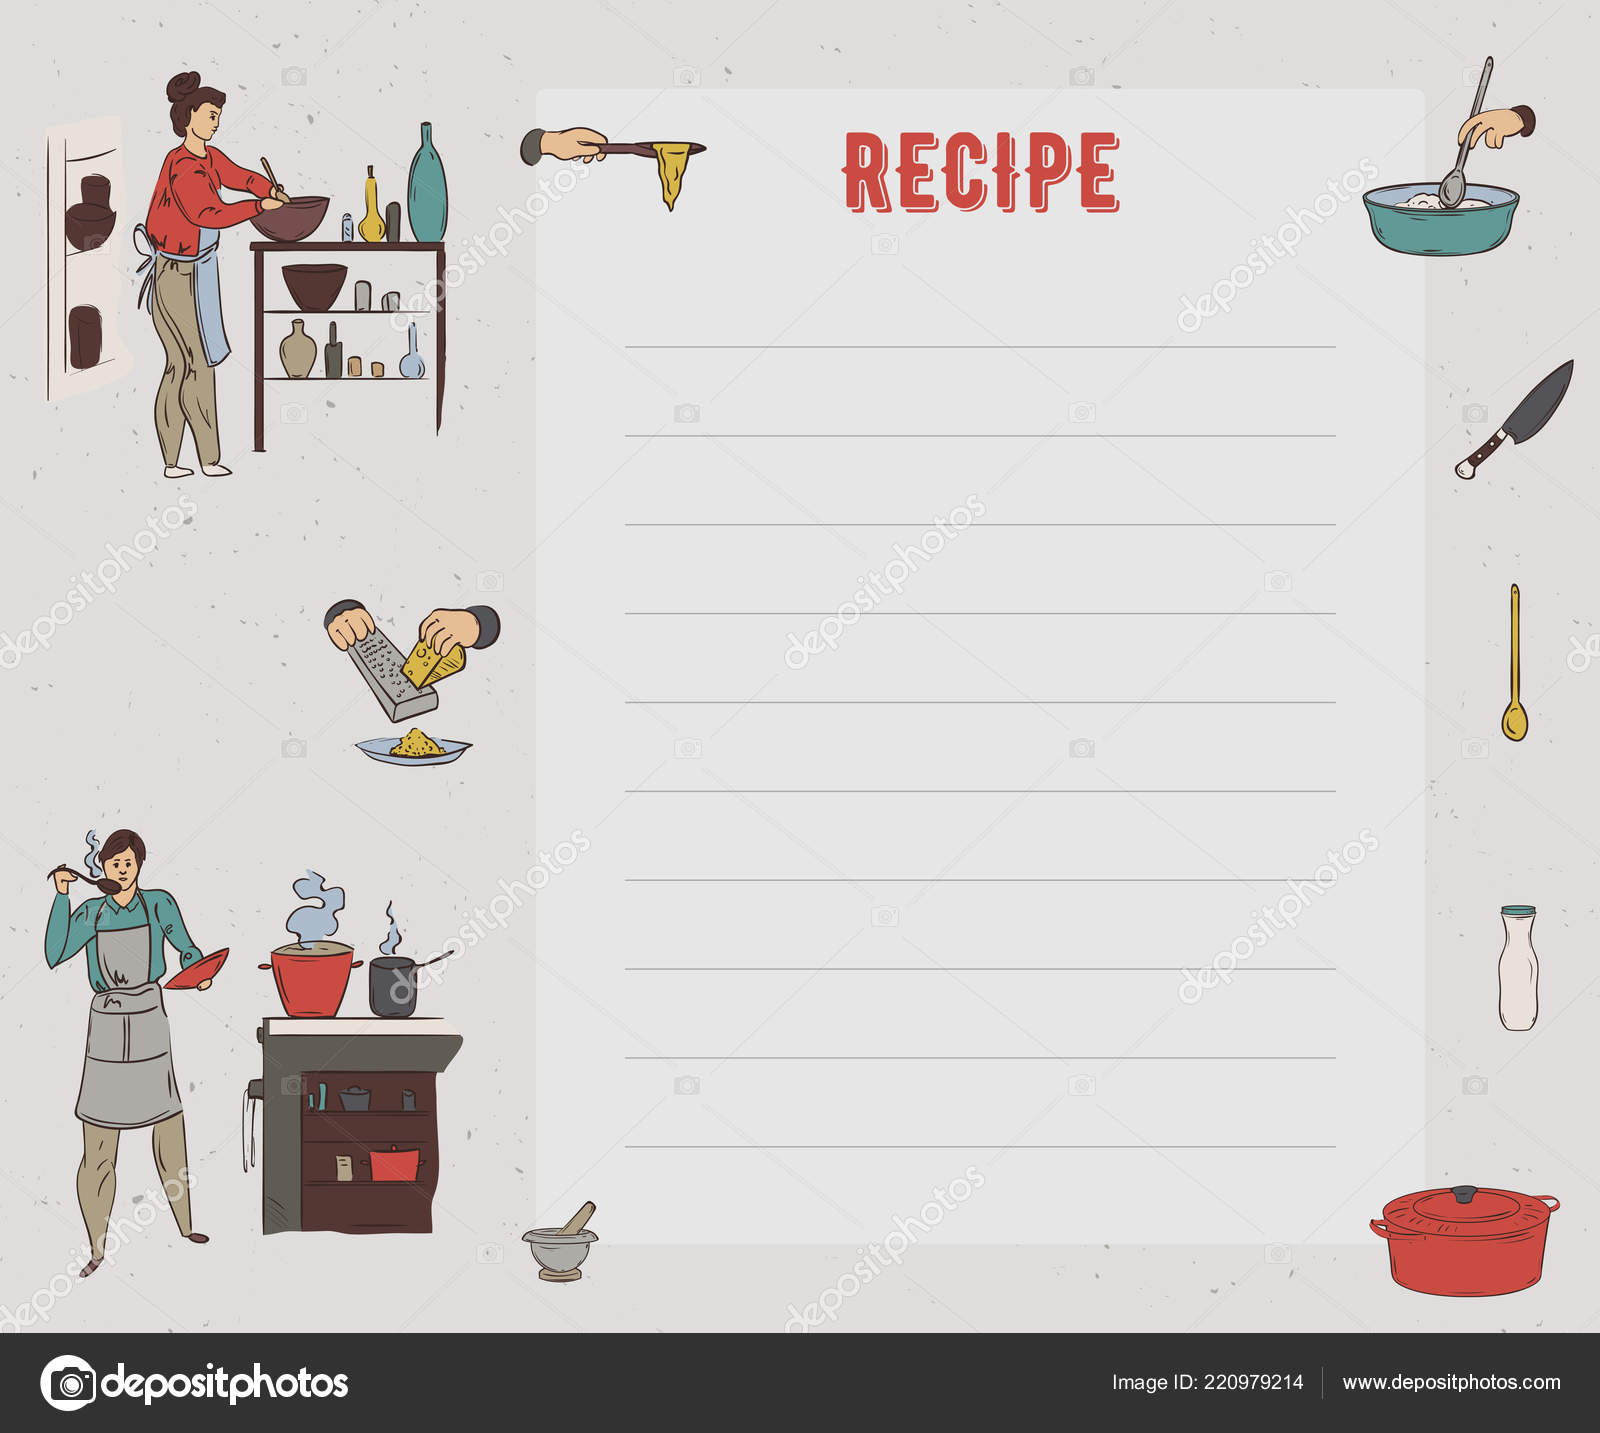 Recipe Card Cookbook Page Design Template People Preparing Intended For Restaurant Recipe Card Template